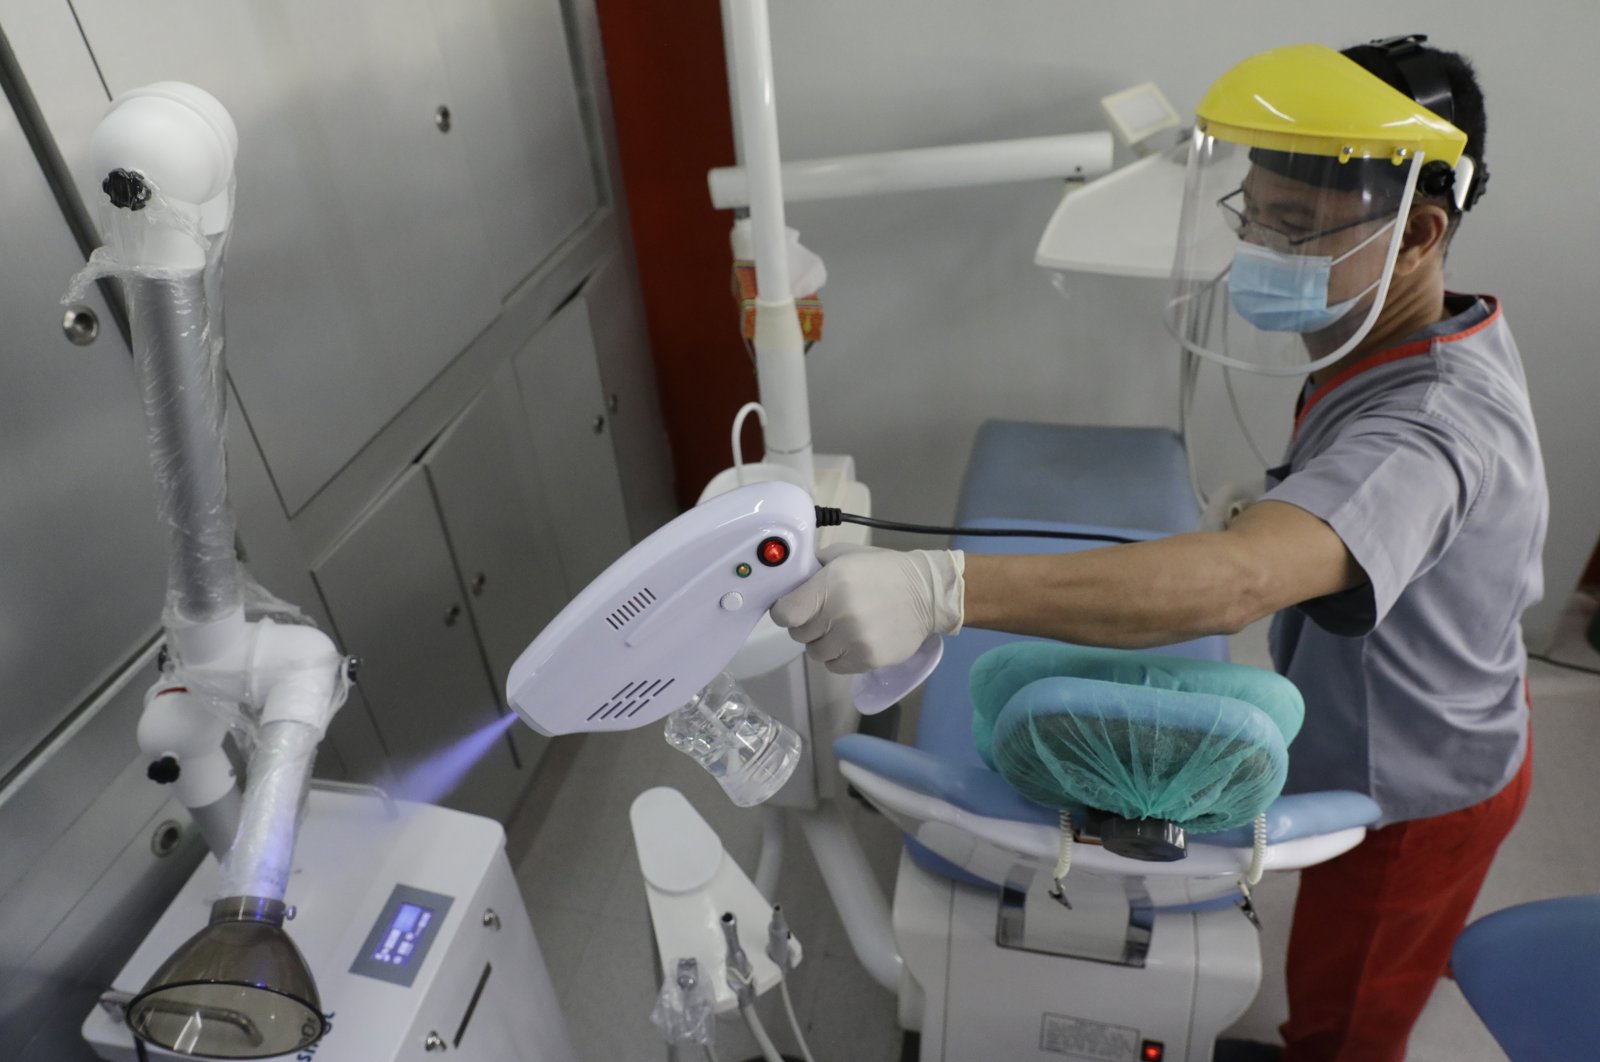 Gerry Aguilar uses a disinfecting gun to prevent the spread of COVID-19 as he cleans the room after each patient at a dental clinic in Manila, Philippines on July 6, 2020. (AP Photo)